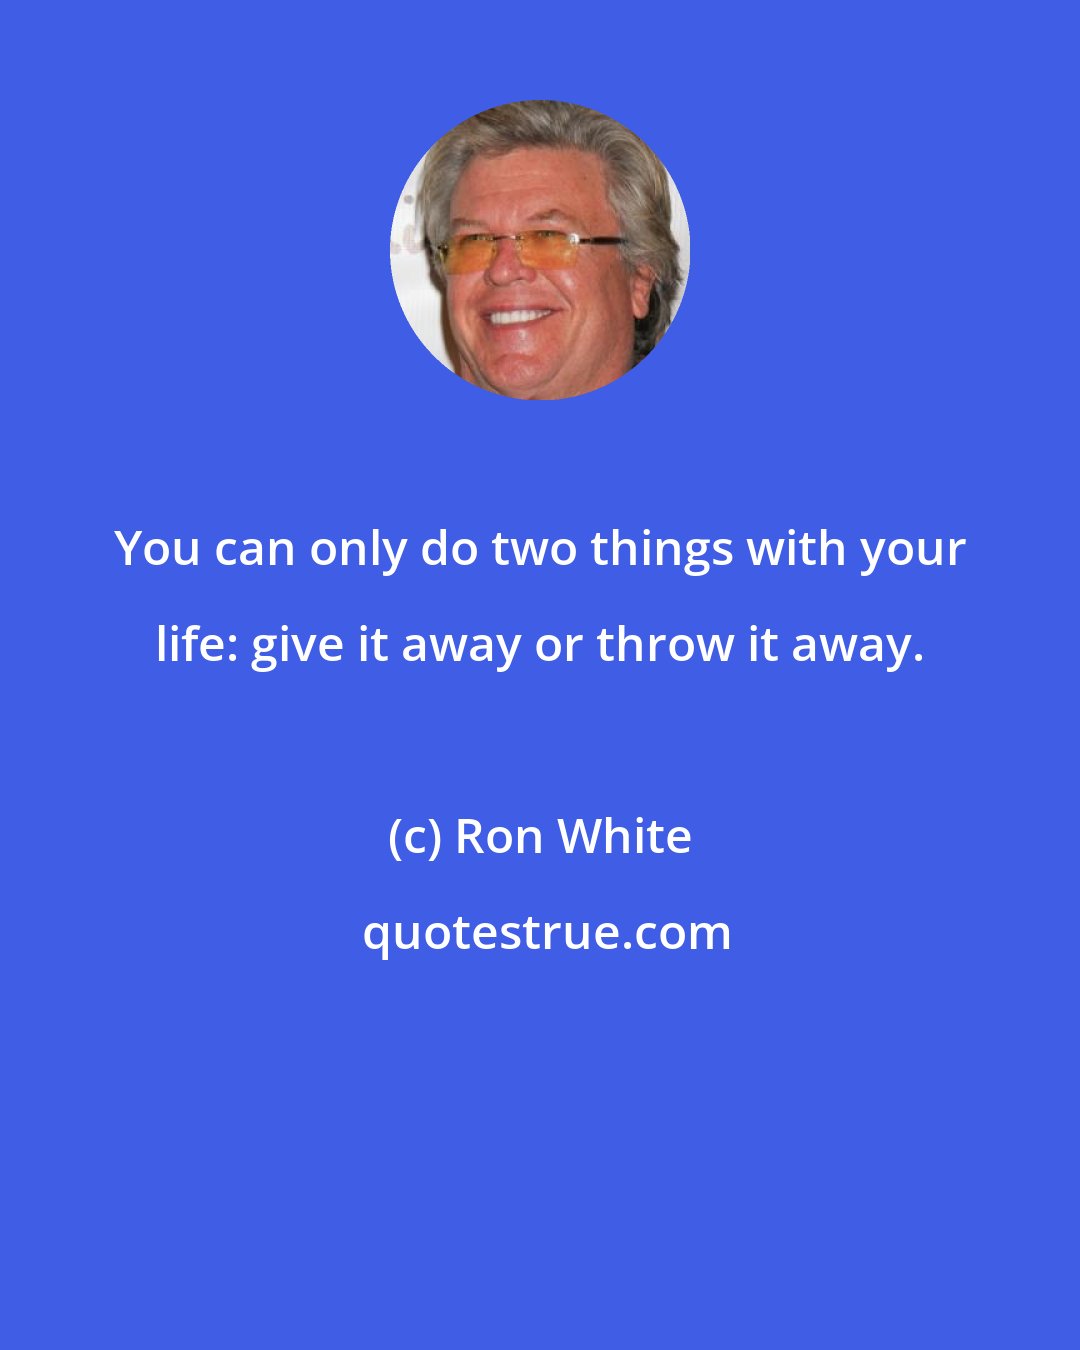 Ron White: You can only do two things with your life: give it away or throw it away.